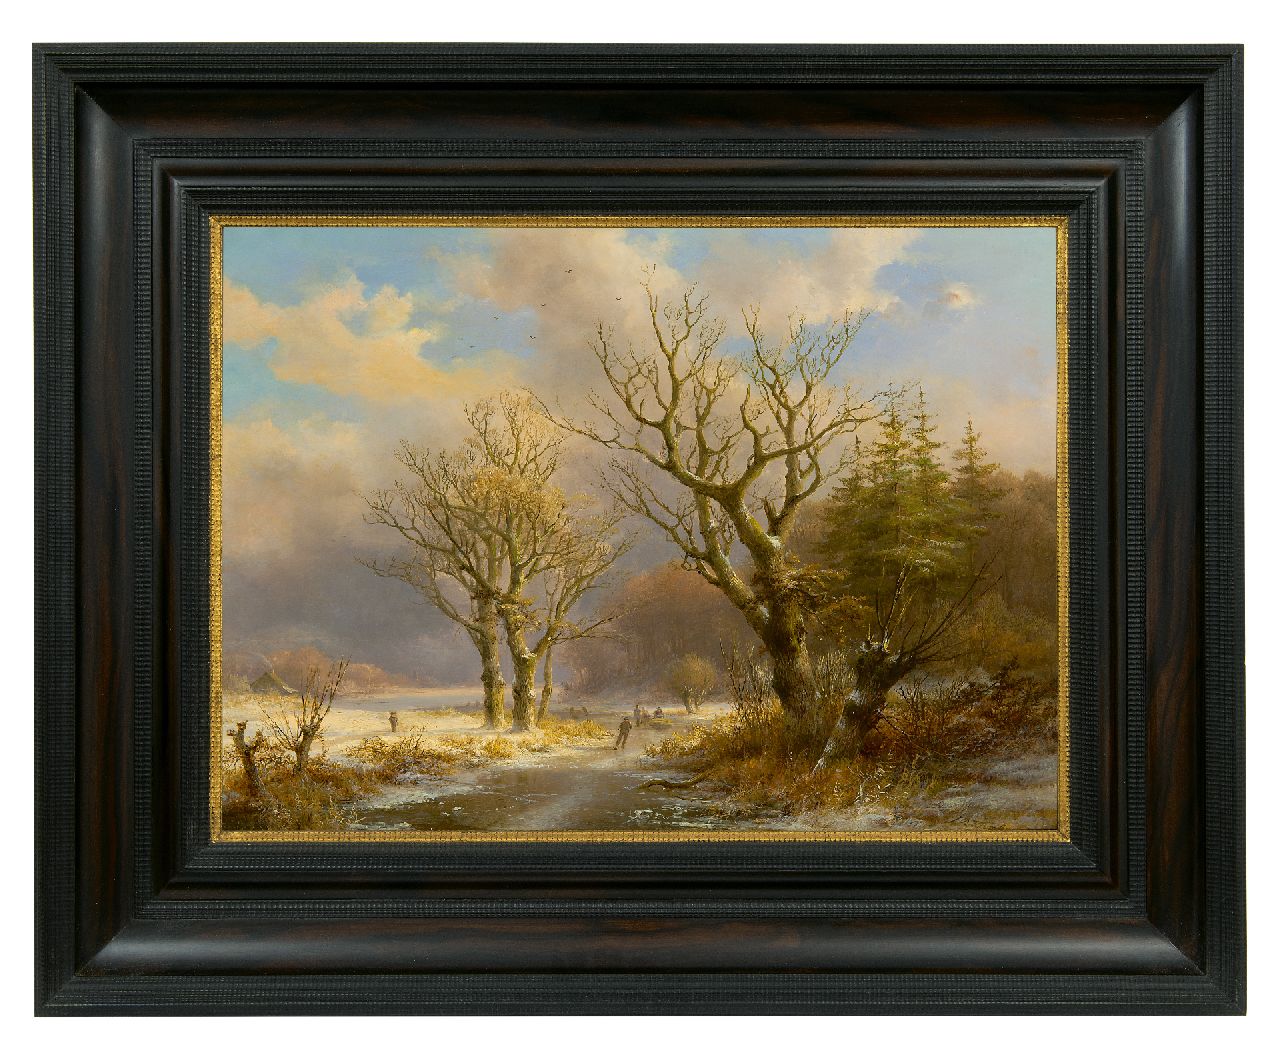 Klombeck J.B.  | Johann Bernard Klombeck | Paintings offered for sale | A wooded winter landscape with skaters, oil on panel 38.7 x 53.6 cm, signed l.r.